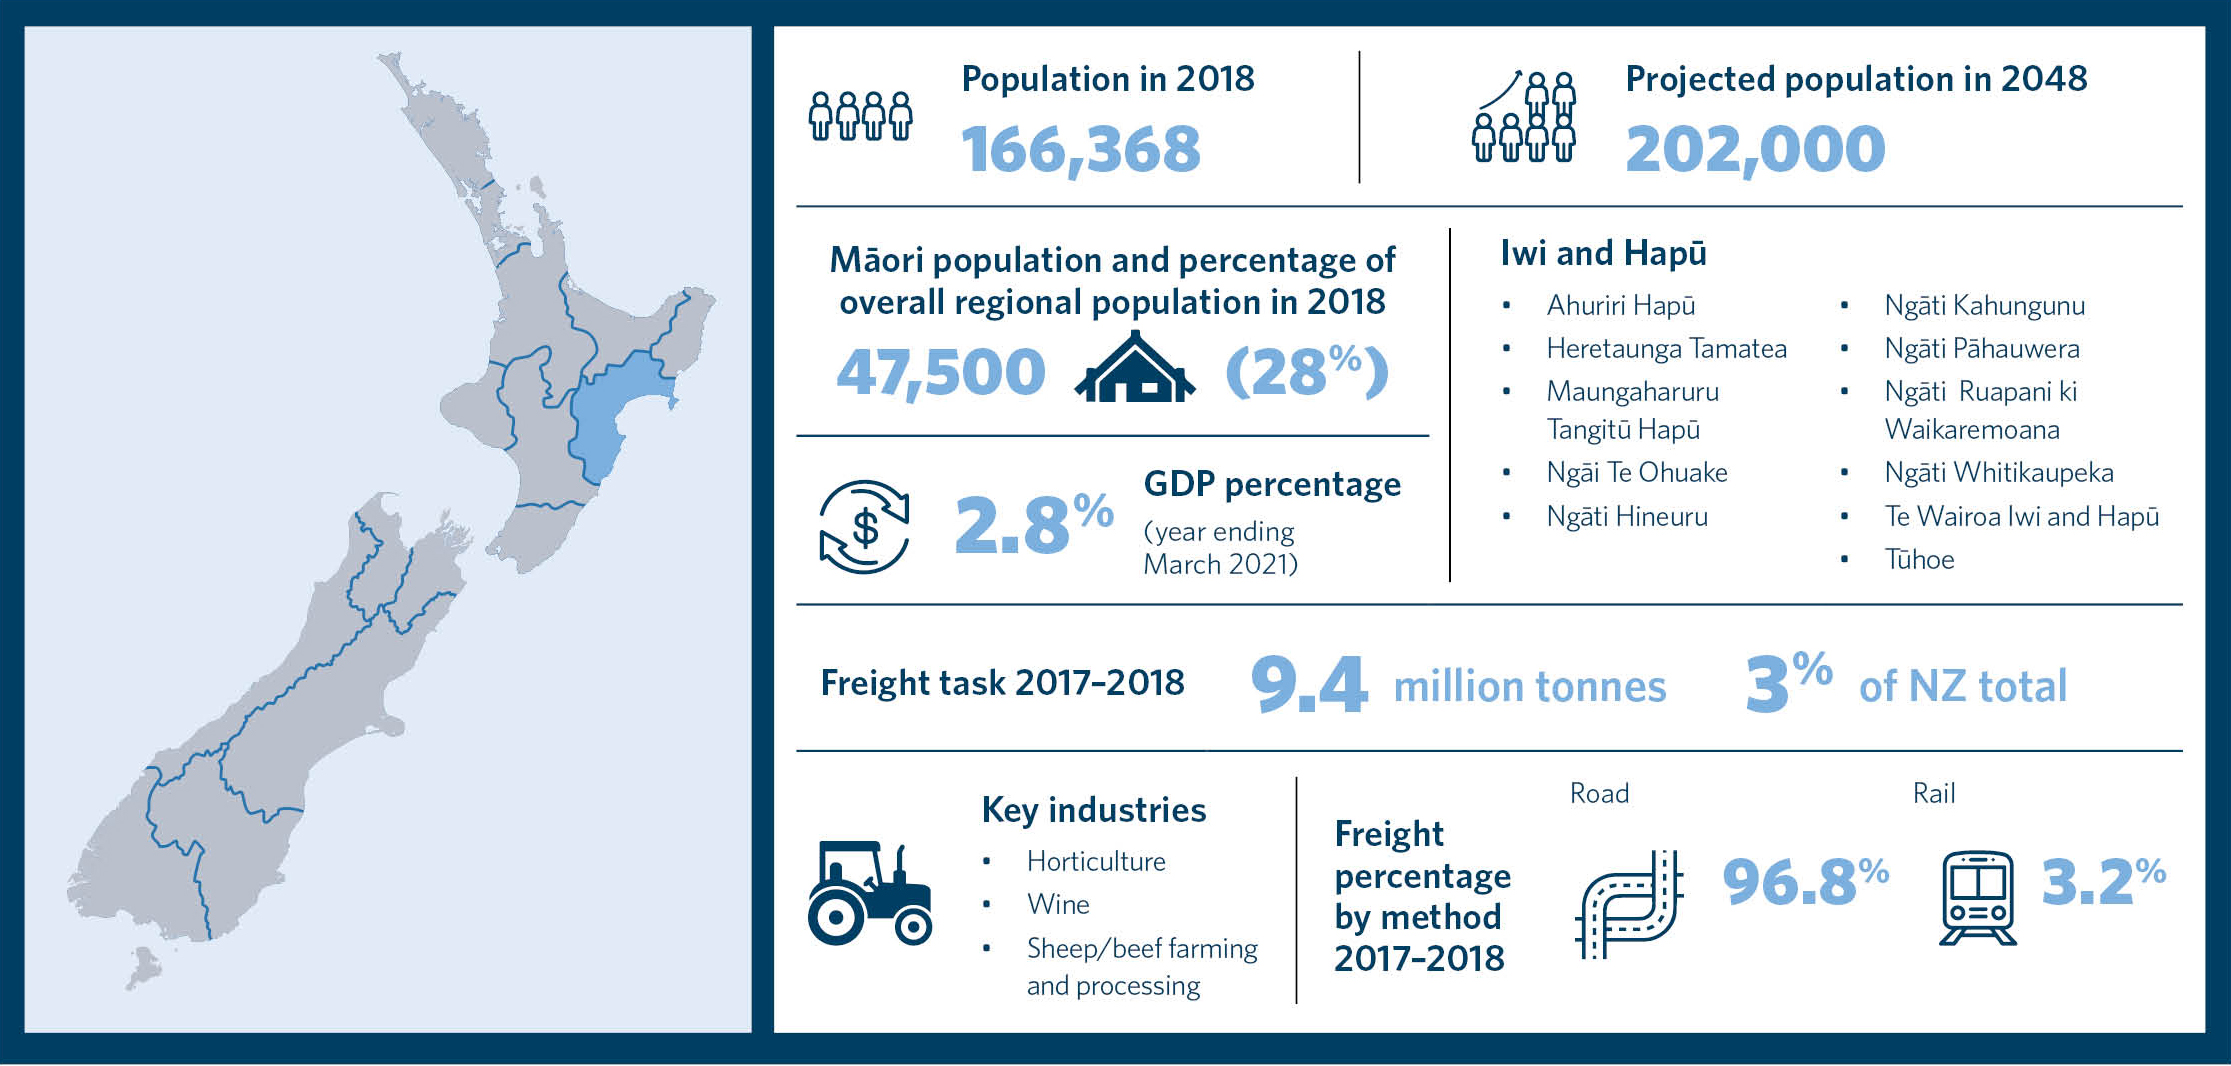 This is an infographic showing statistics for the region of Te Matau-a-Māui Hawke’s Bay. It includes information about the population in 2018, projected population in 2048, Māori population and percentage of overall regional population in 2018, a list of 